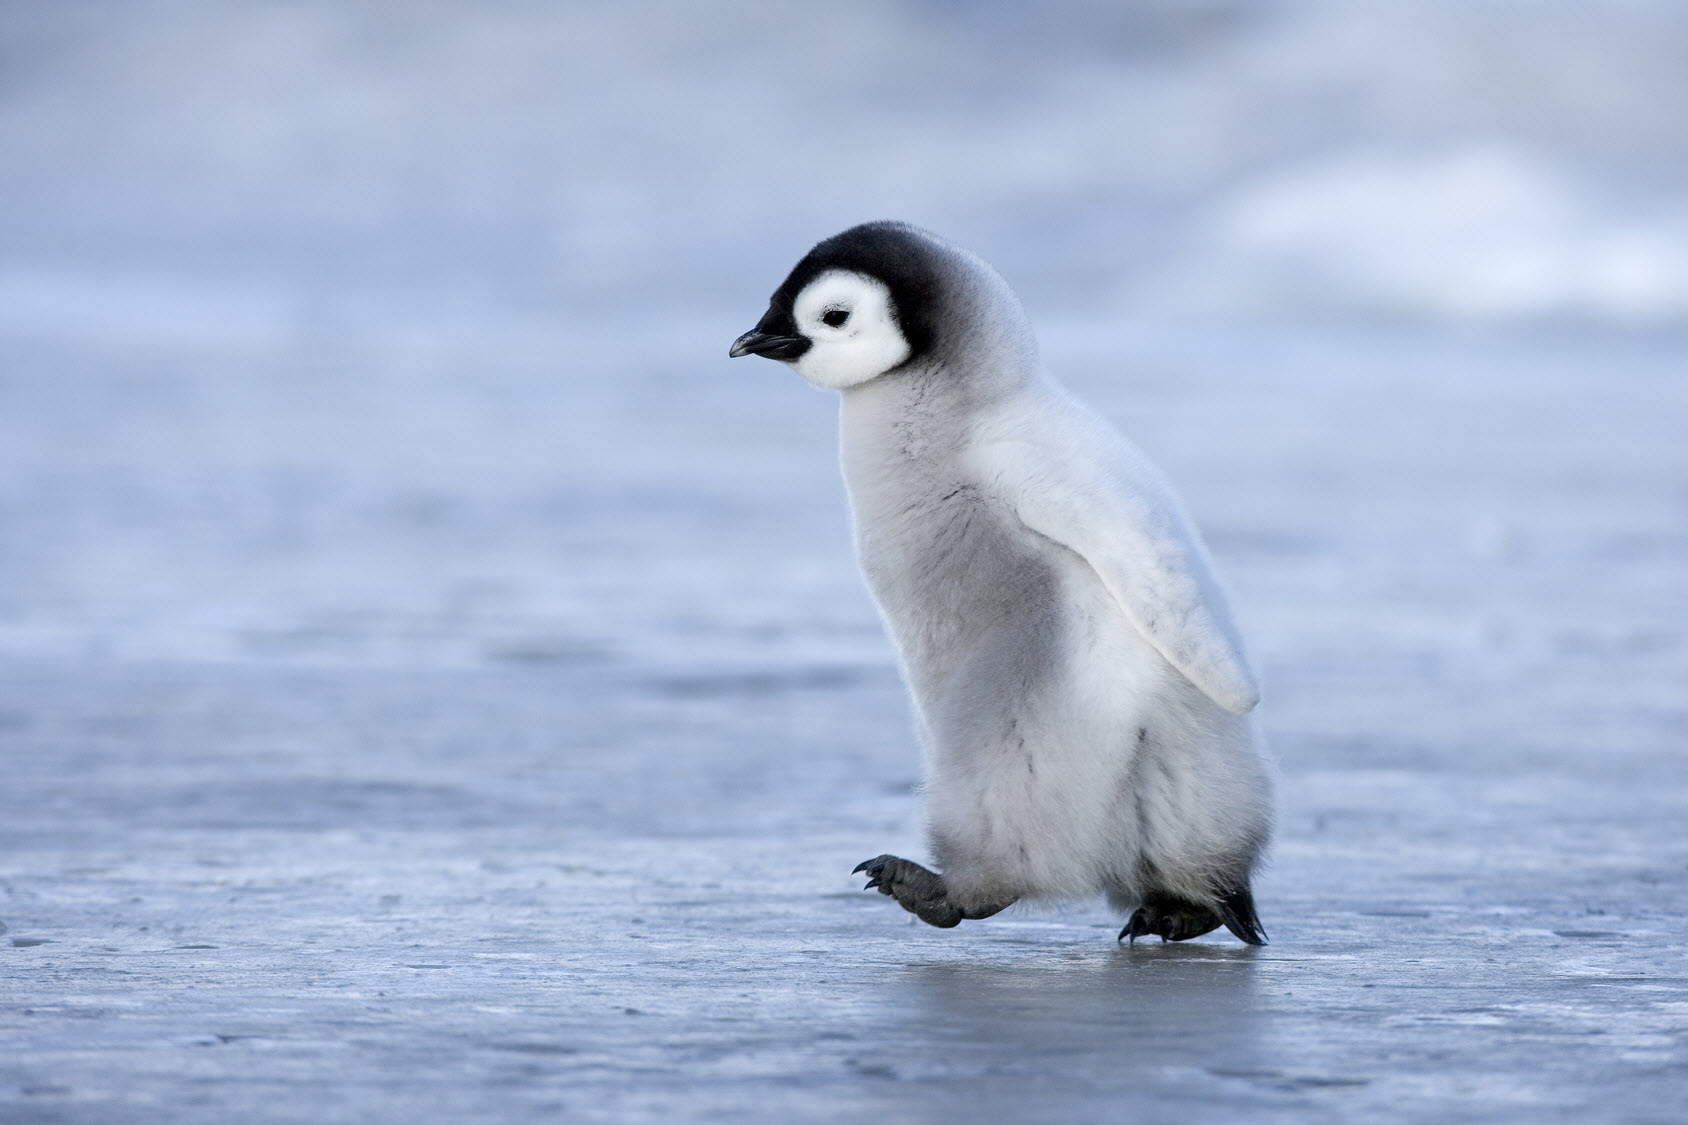 Cute Penguin Image Pictures New Full HD Photoshoots